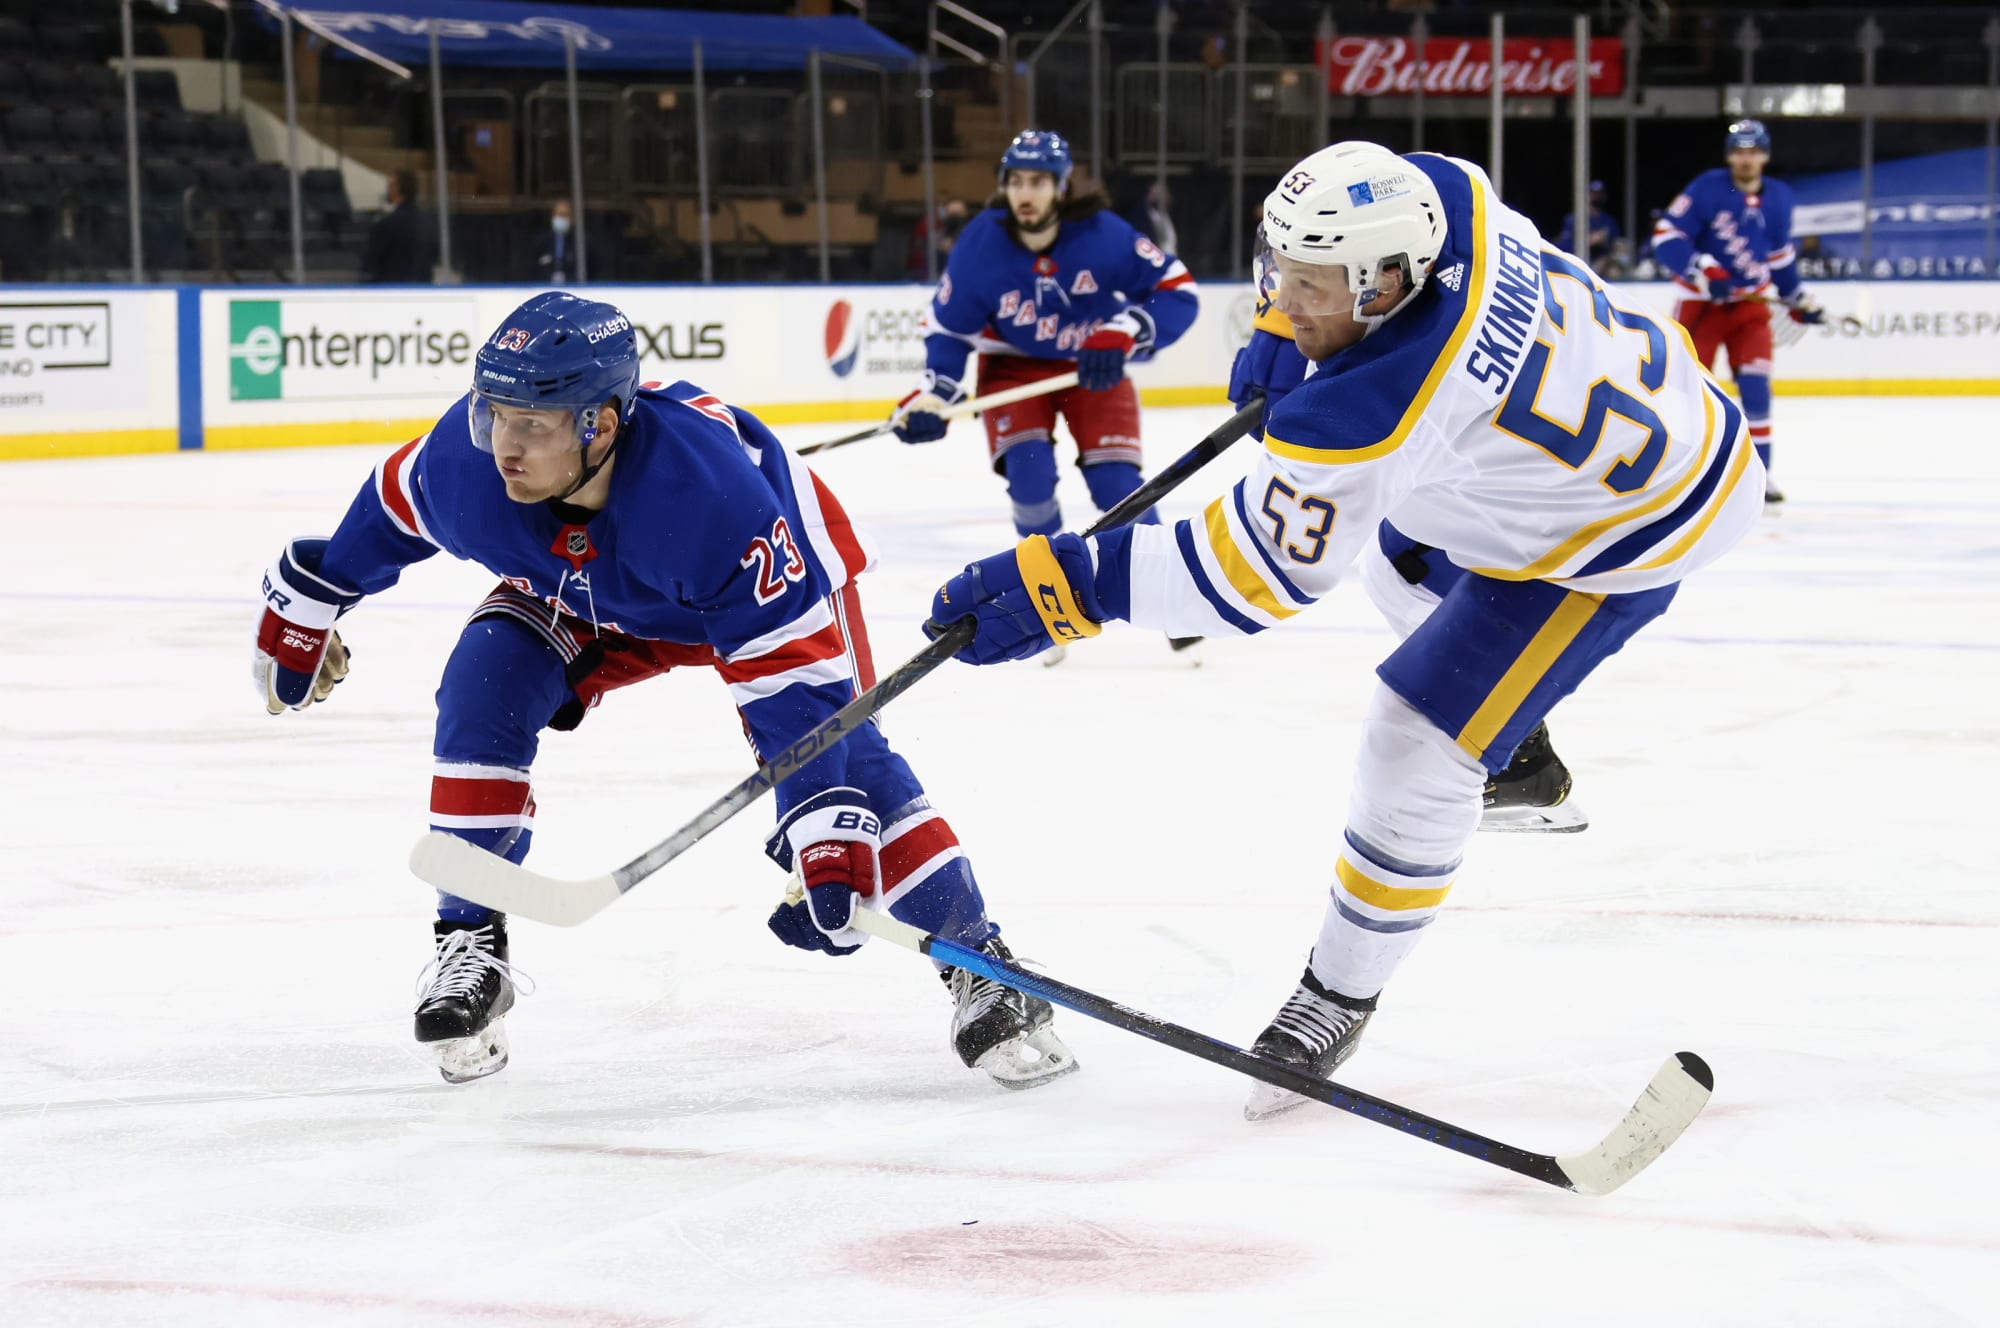 Sabres vs Rangers Date, Time, TV, Streaming, More